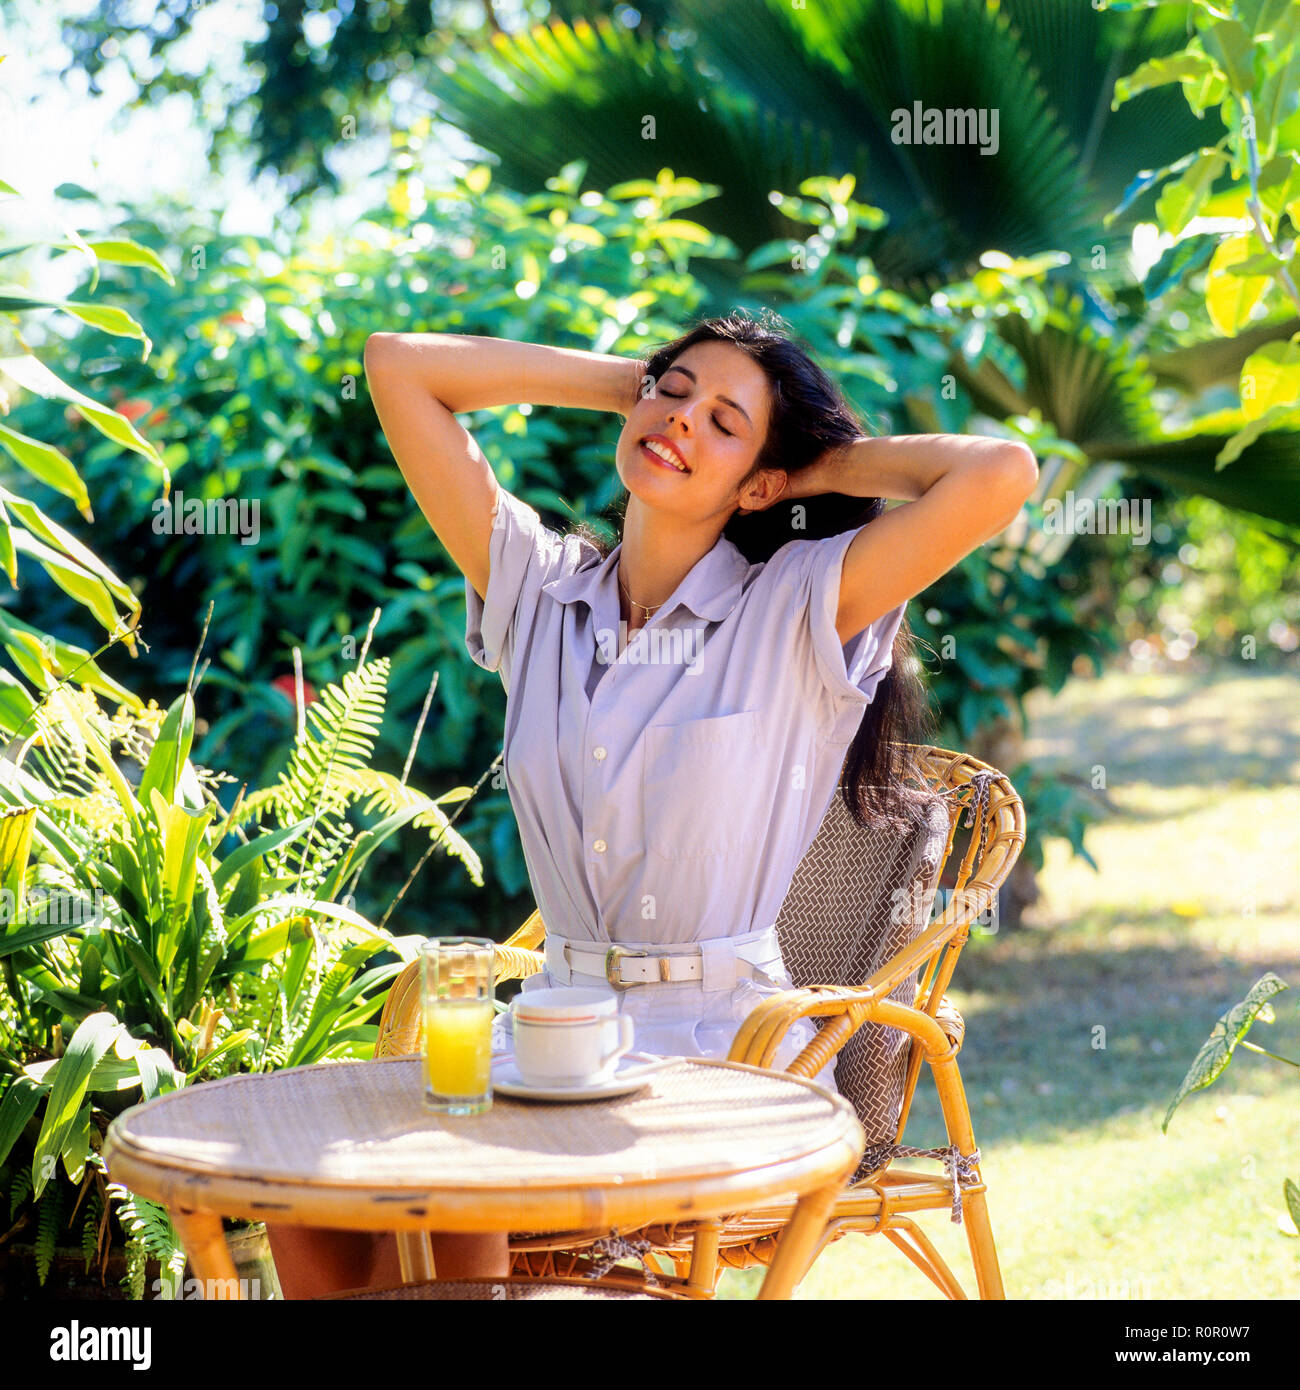 Giovane donna stretching nel giardino tropicale, Guadalupa, French West Indies, Foto Stock